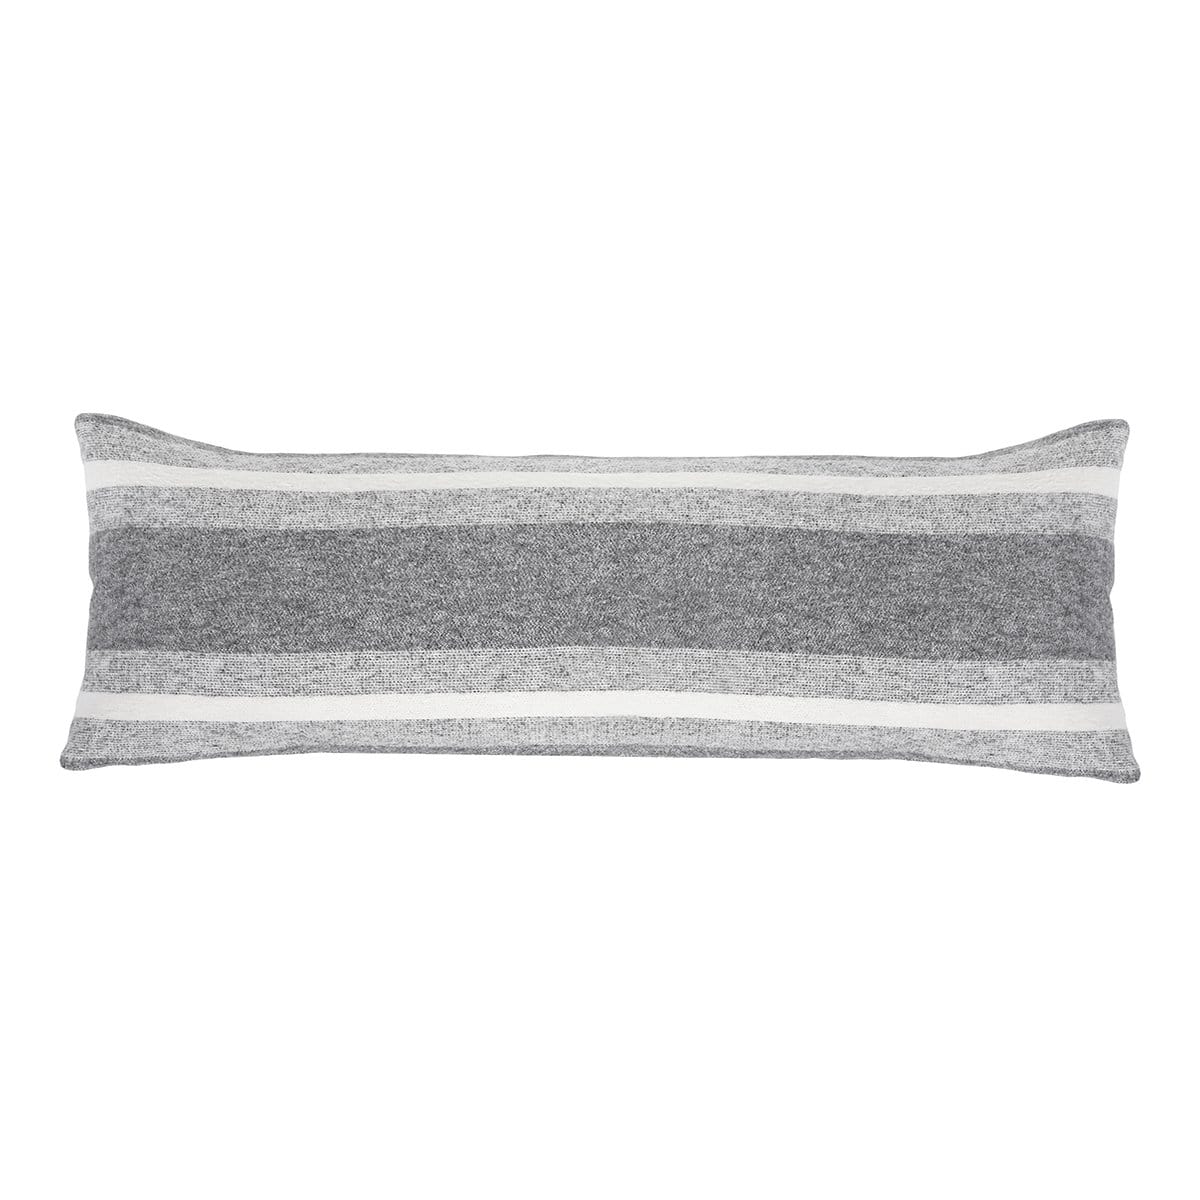 Alpine Lumbar Pillow by Pom at Home